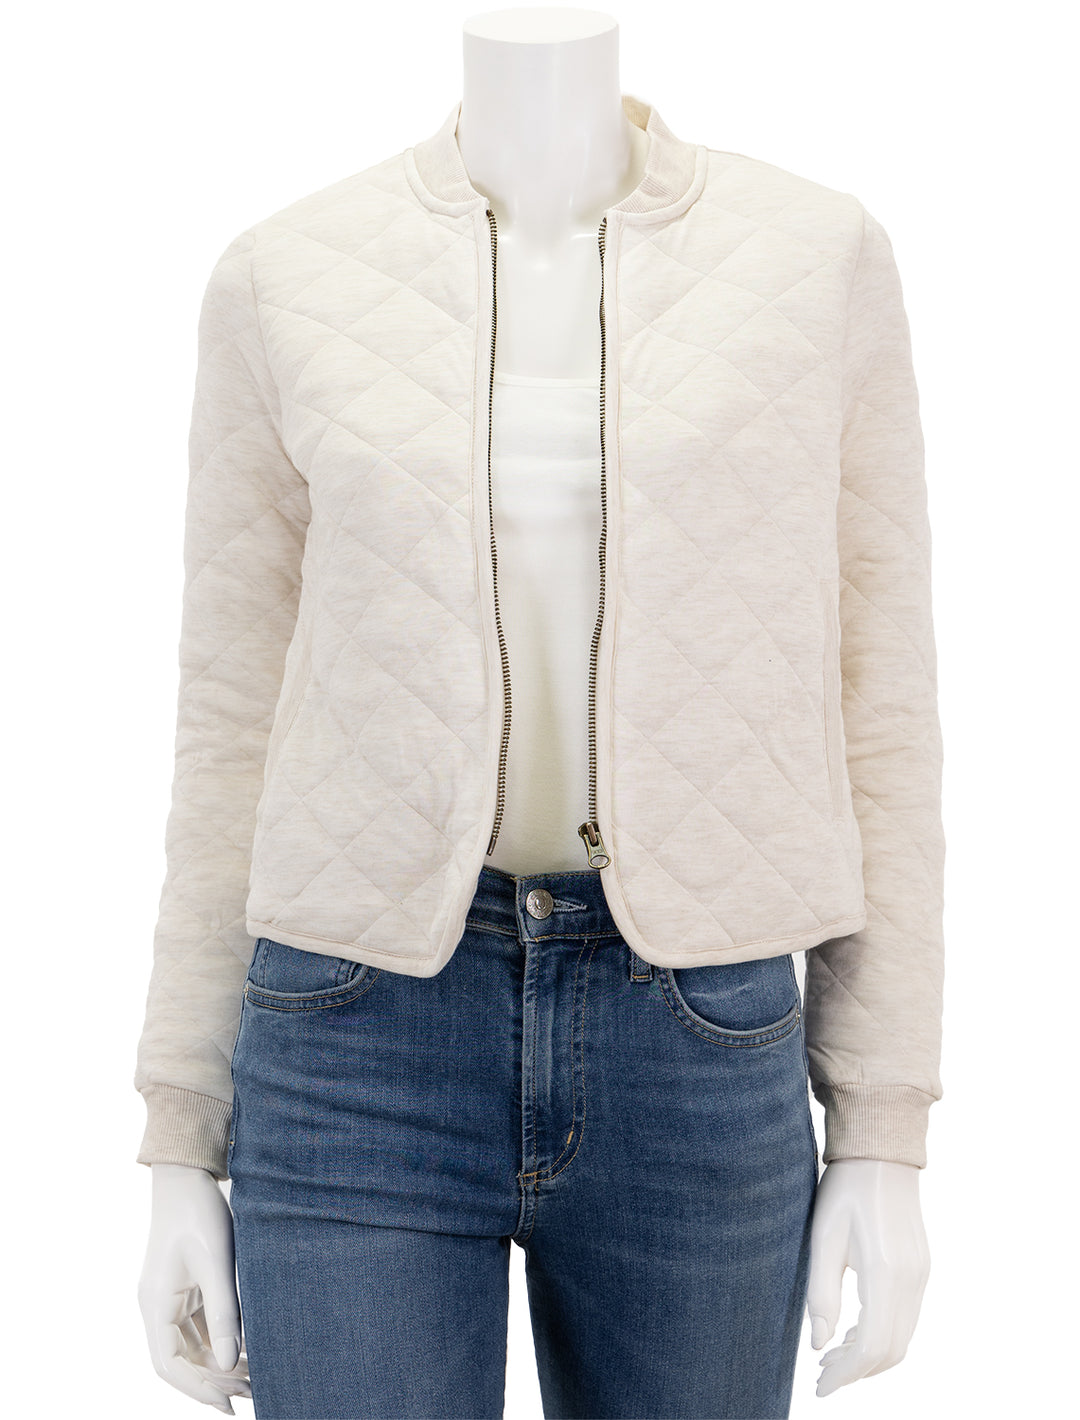 Front view of Marine Layer's updated corbet quilted bomber in antique white, unzipped.